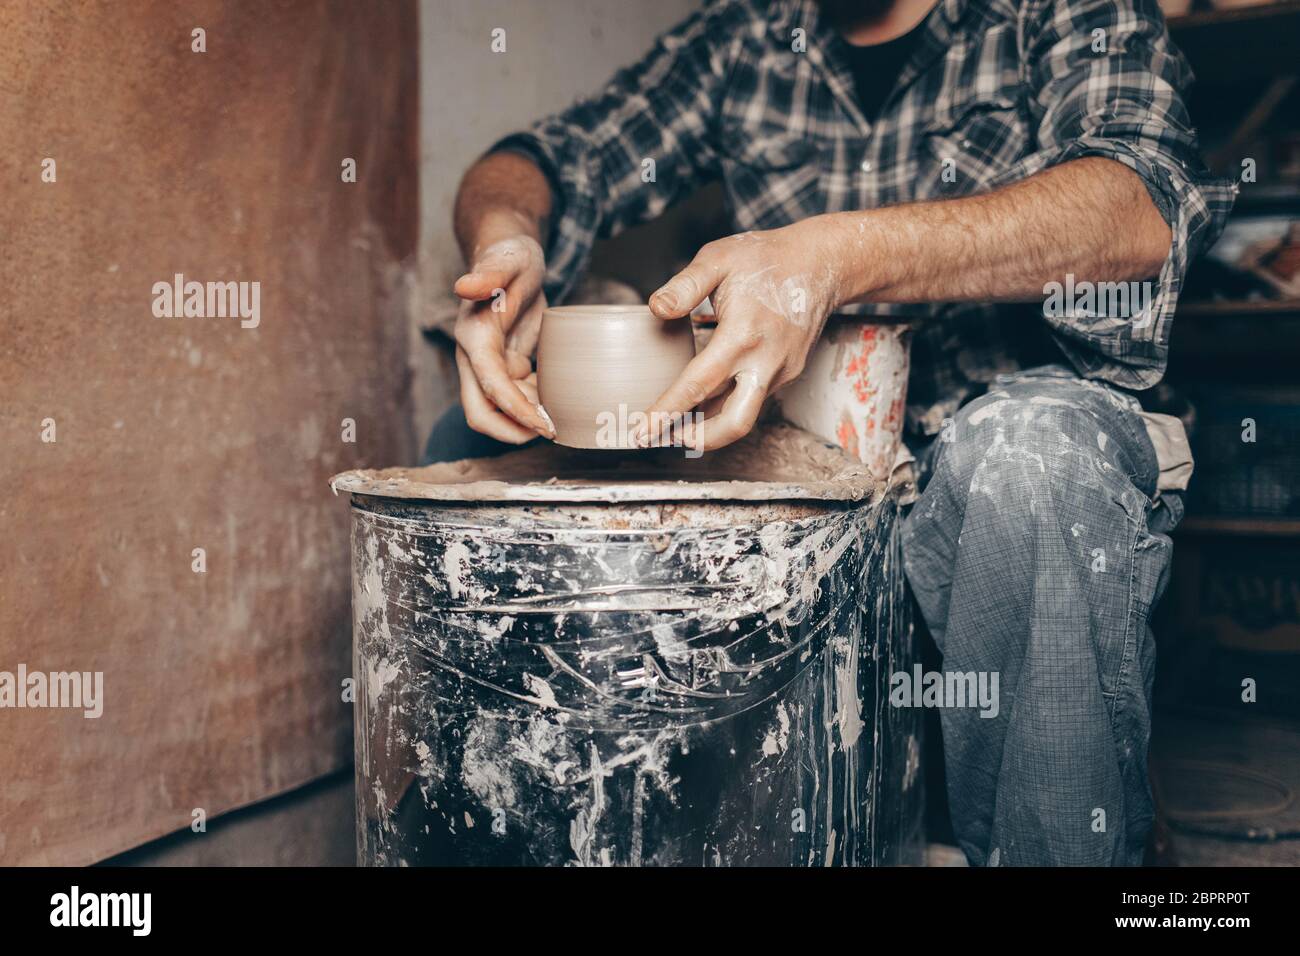 Pottery master works on pottery wheel in workshop Stock Photo